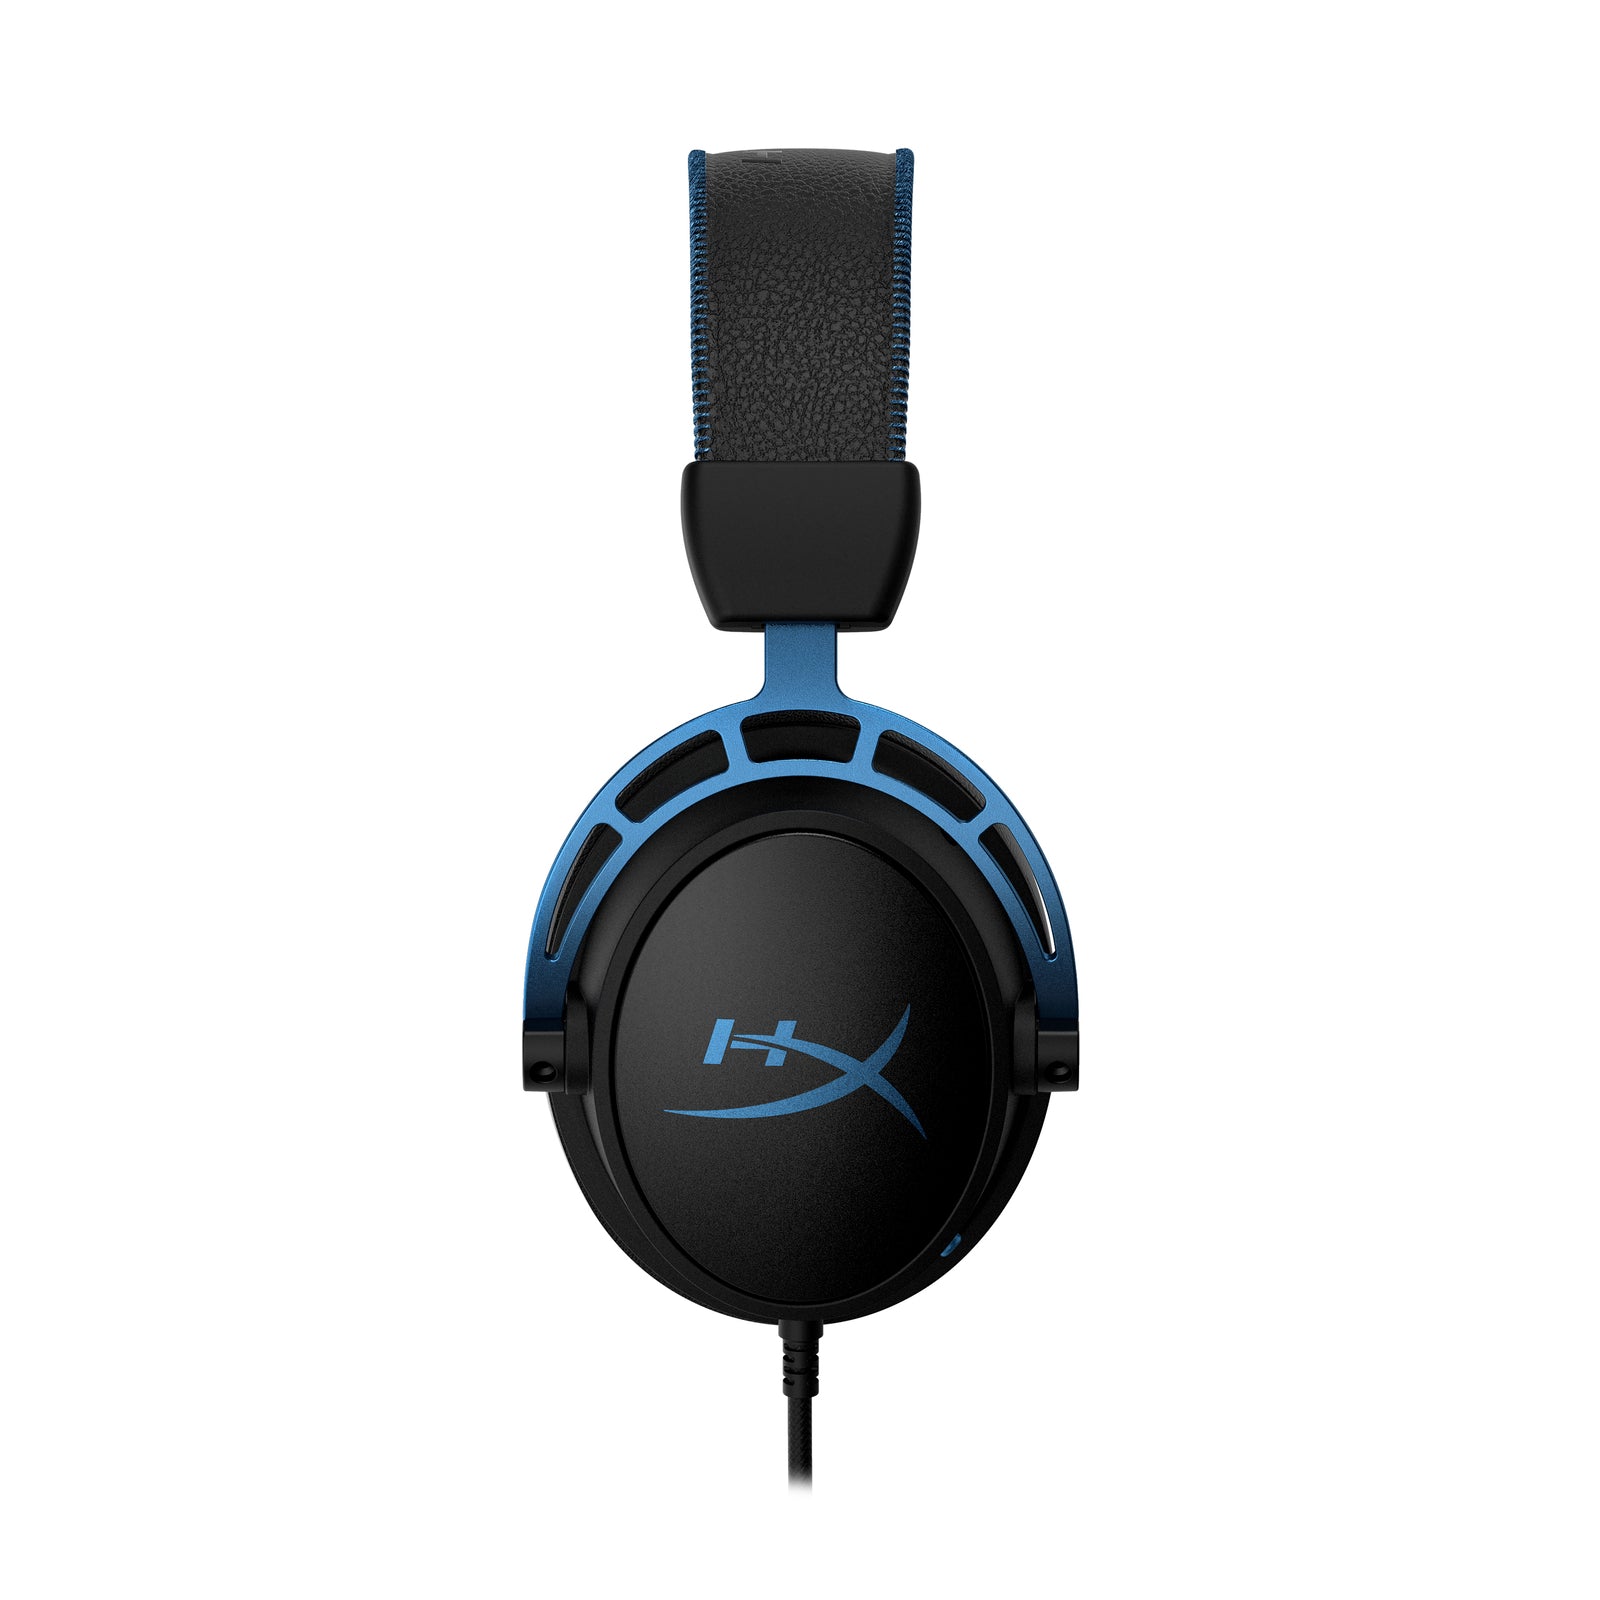 Cloud Alpha S – USB Gaming Headset with 7.1 Surround Sound 